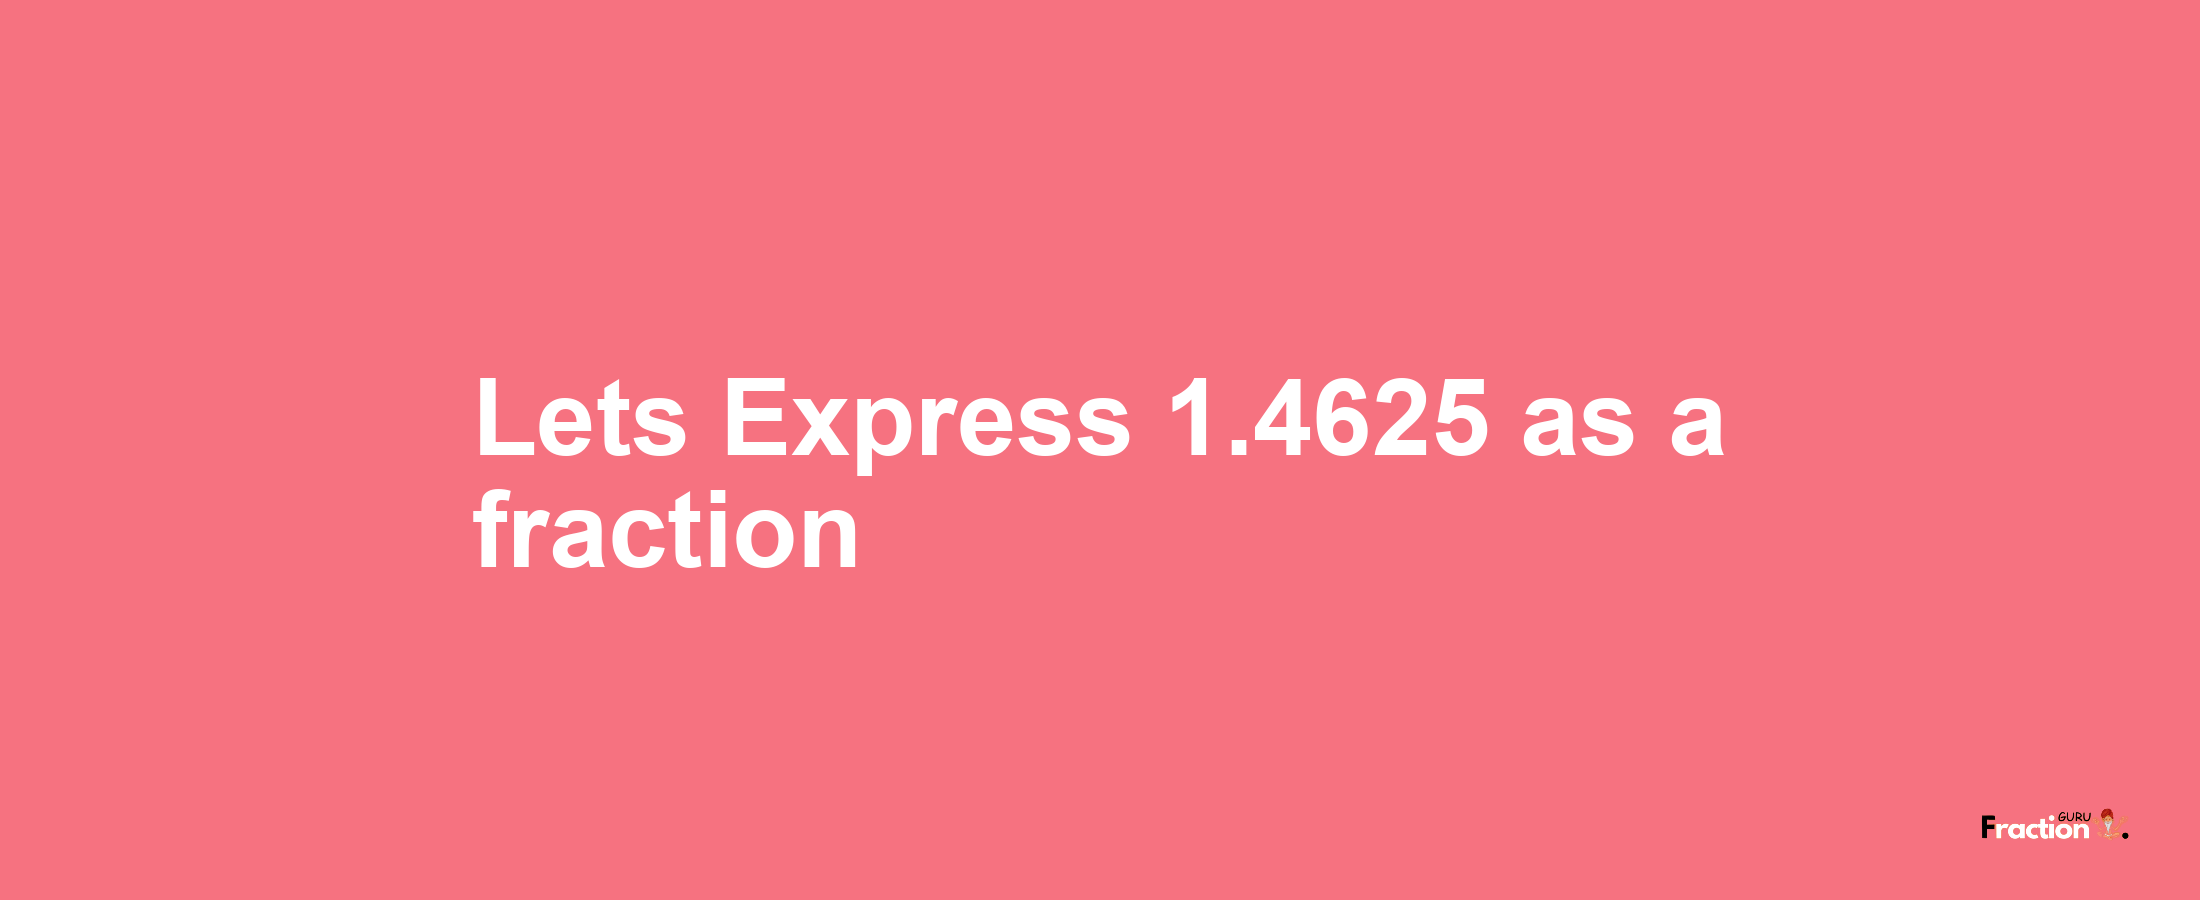 Lets Express 1.4625 as afraction